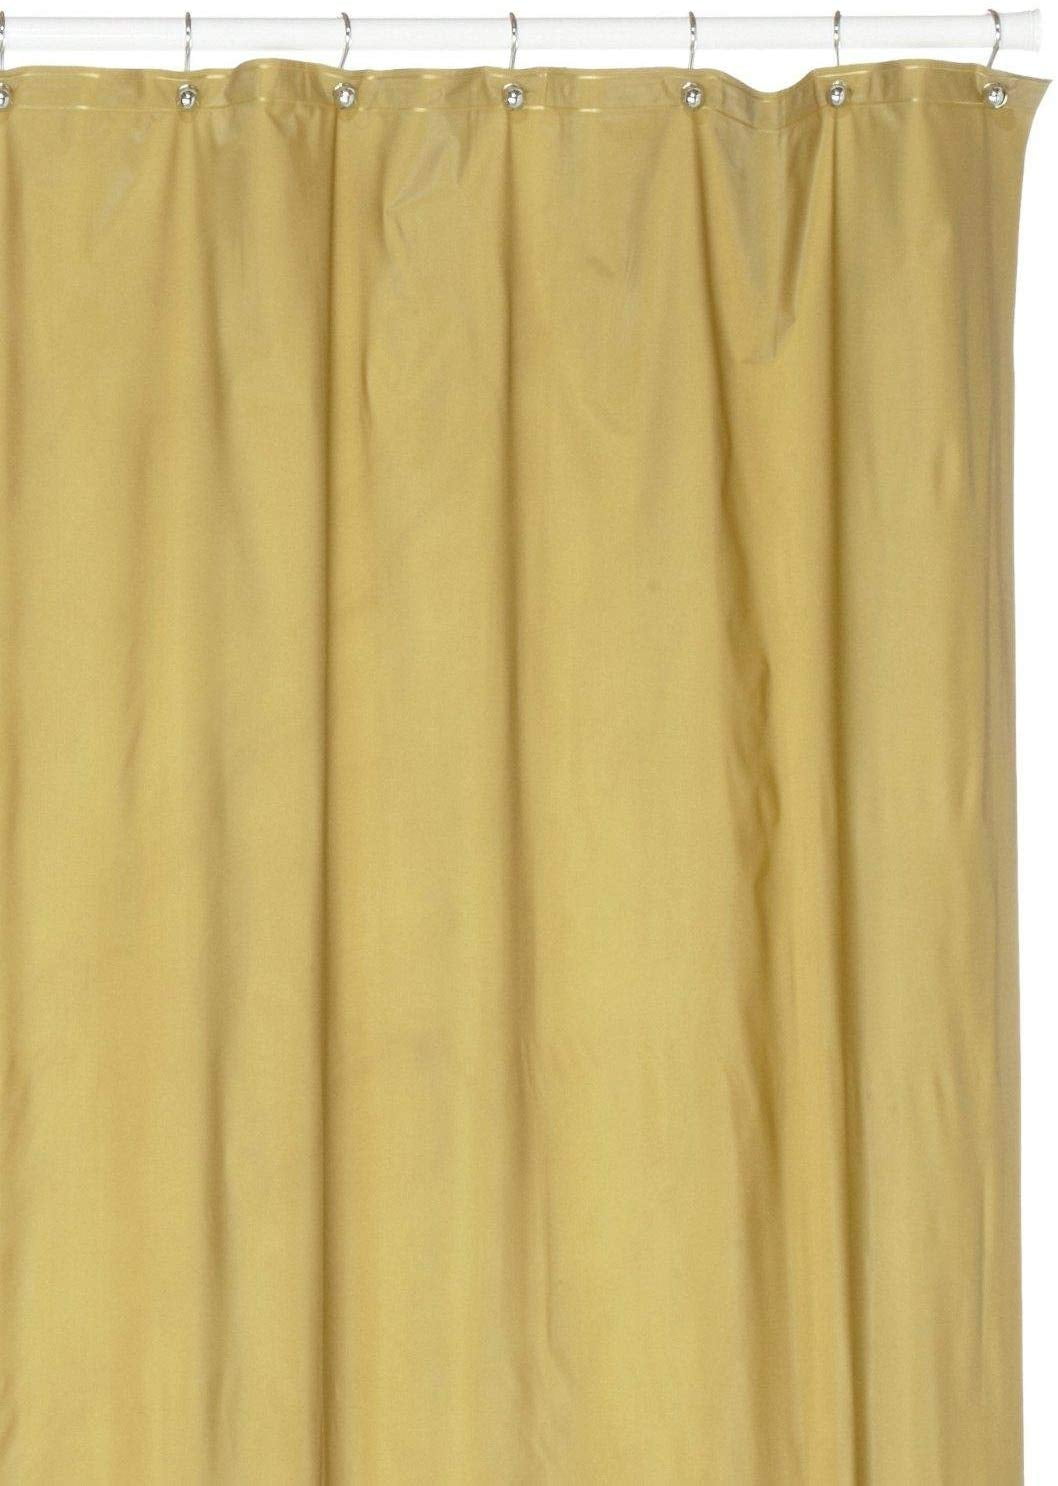 Heavy Duty Magnetized Shower Curtain Liner Mildew Resistant Gold ...